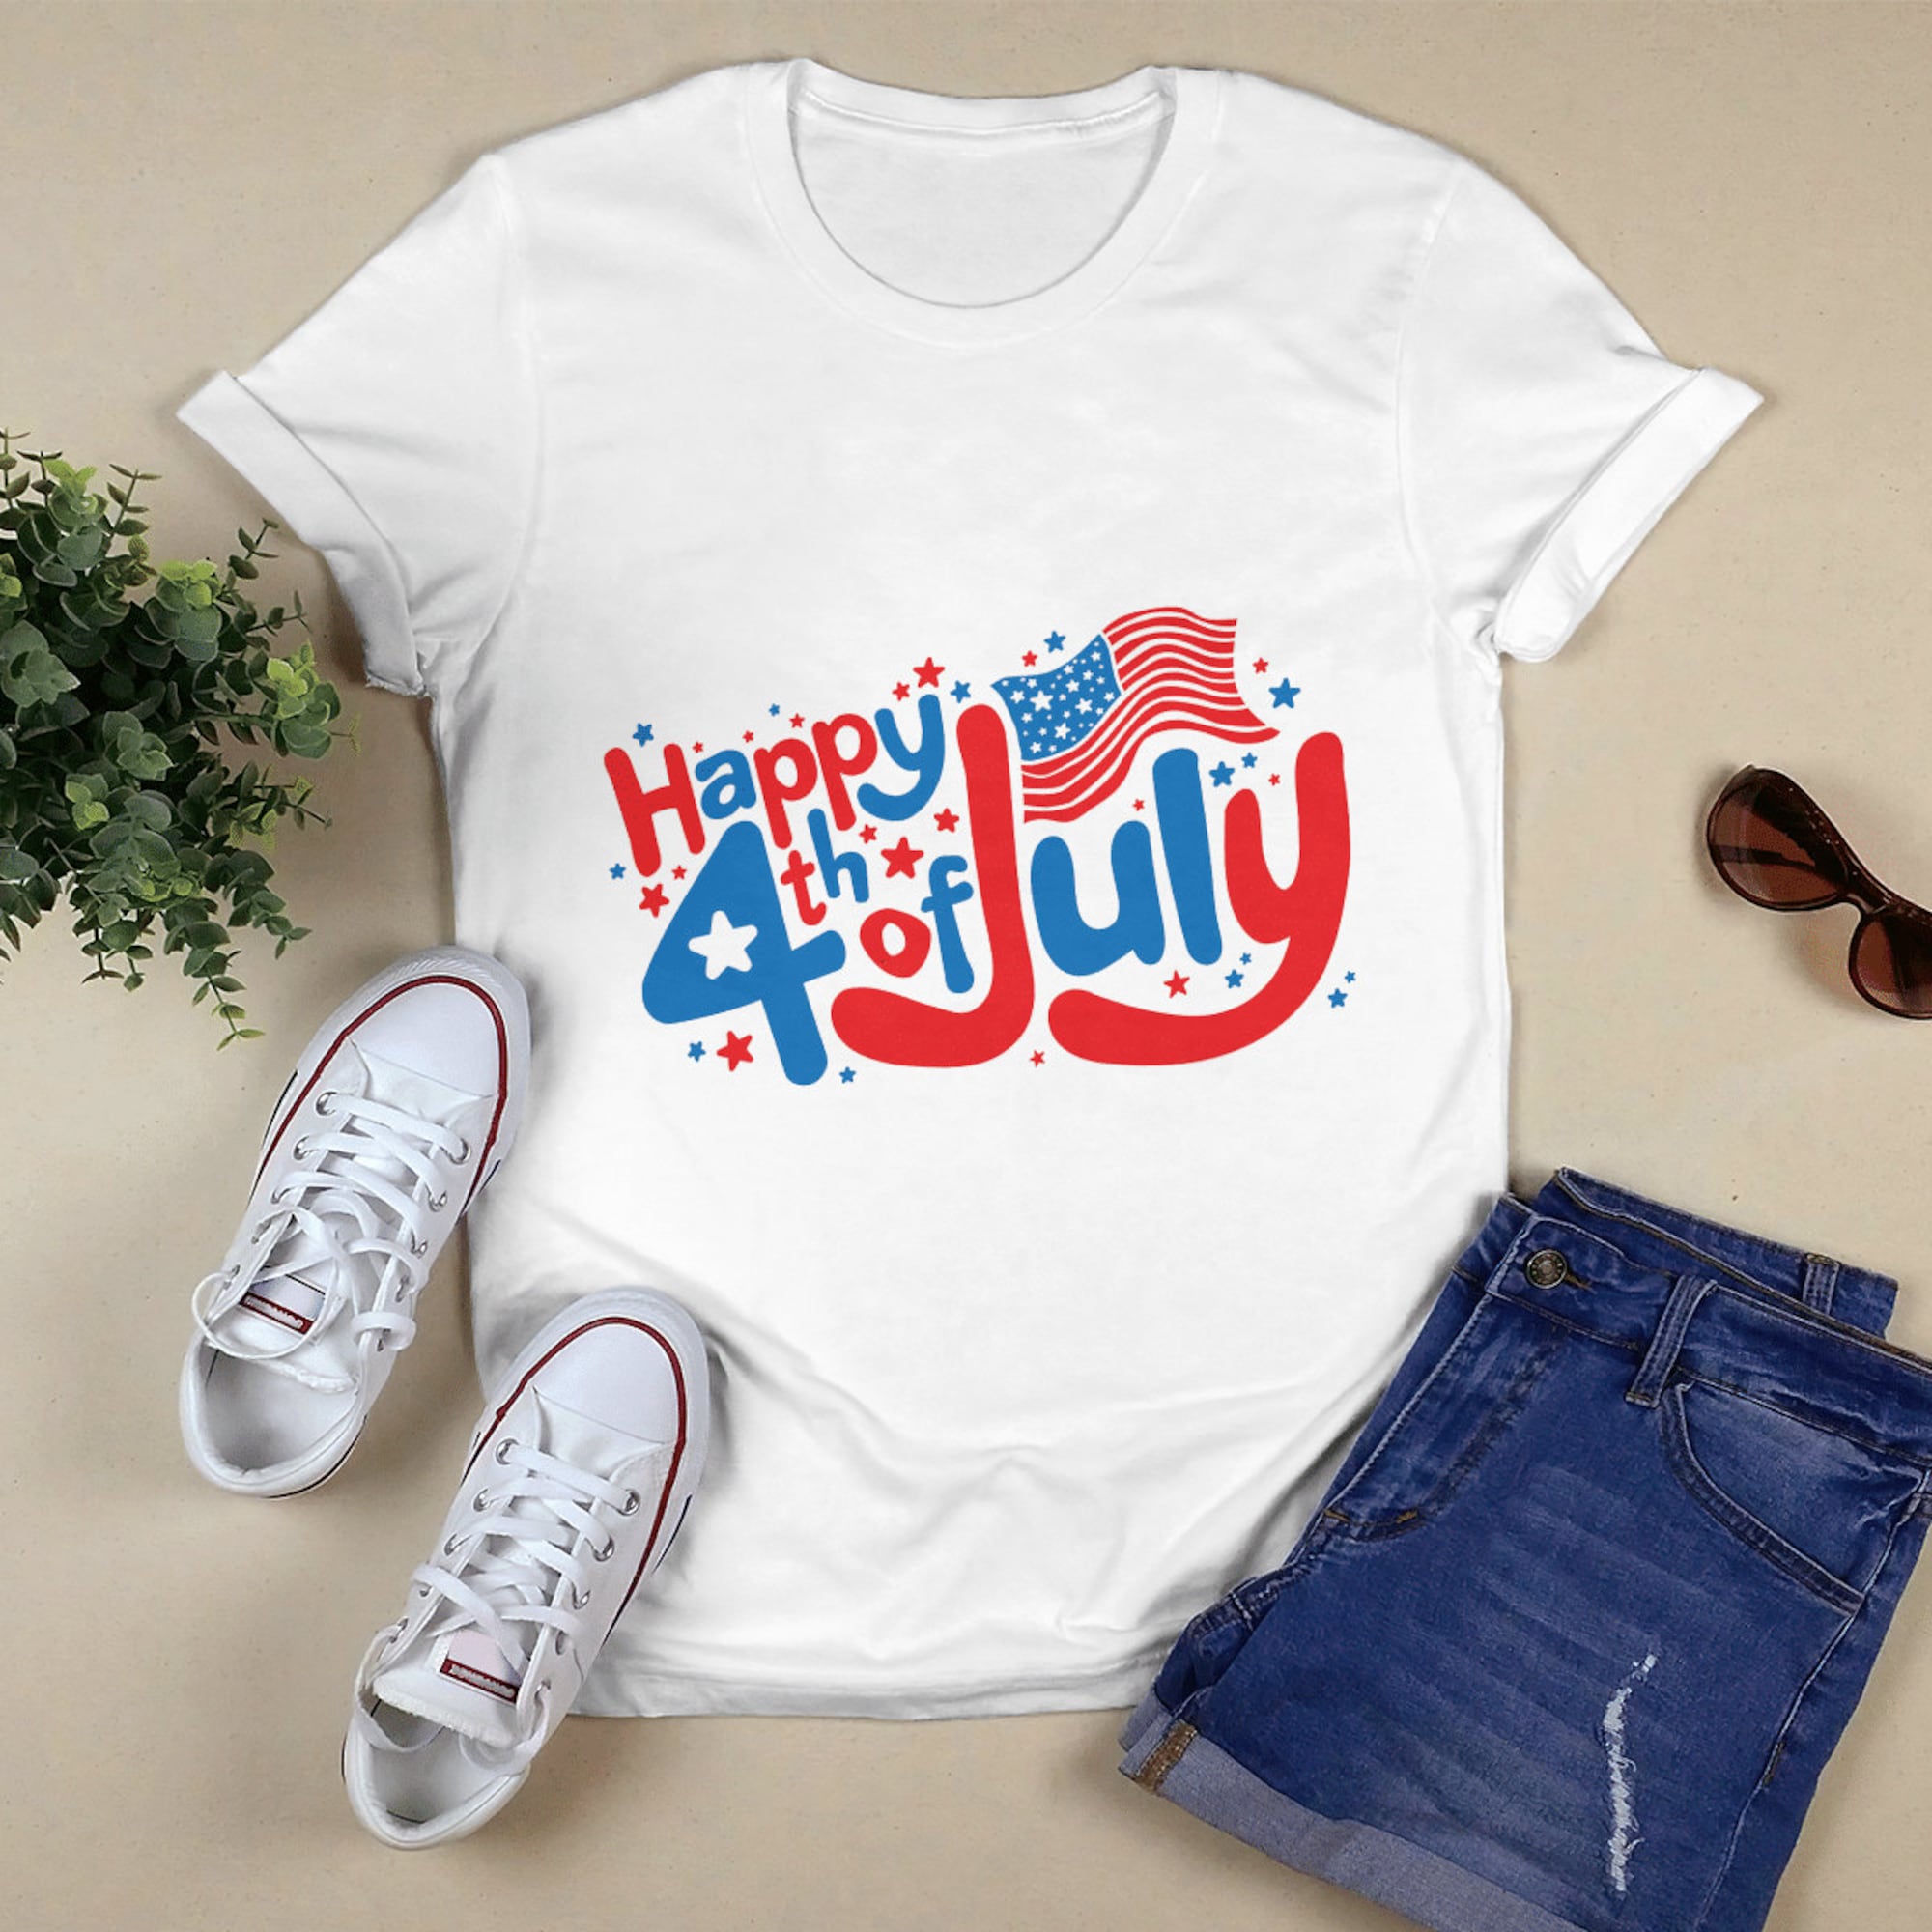 Discover Happy 4th July 2 Shirt For 4th Of July Independence Day